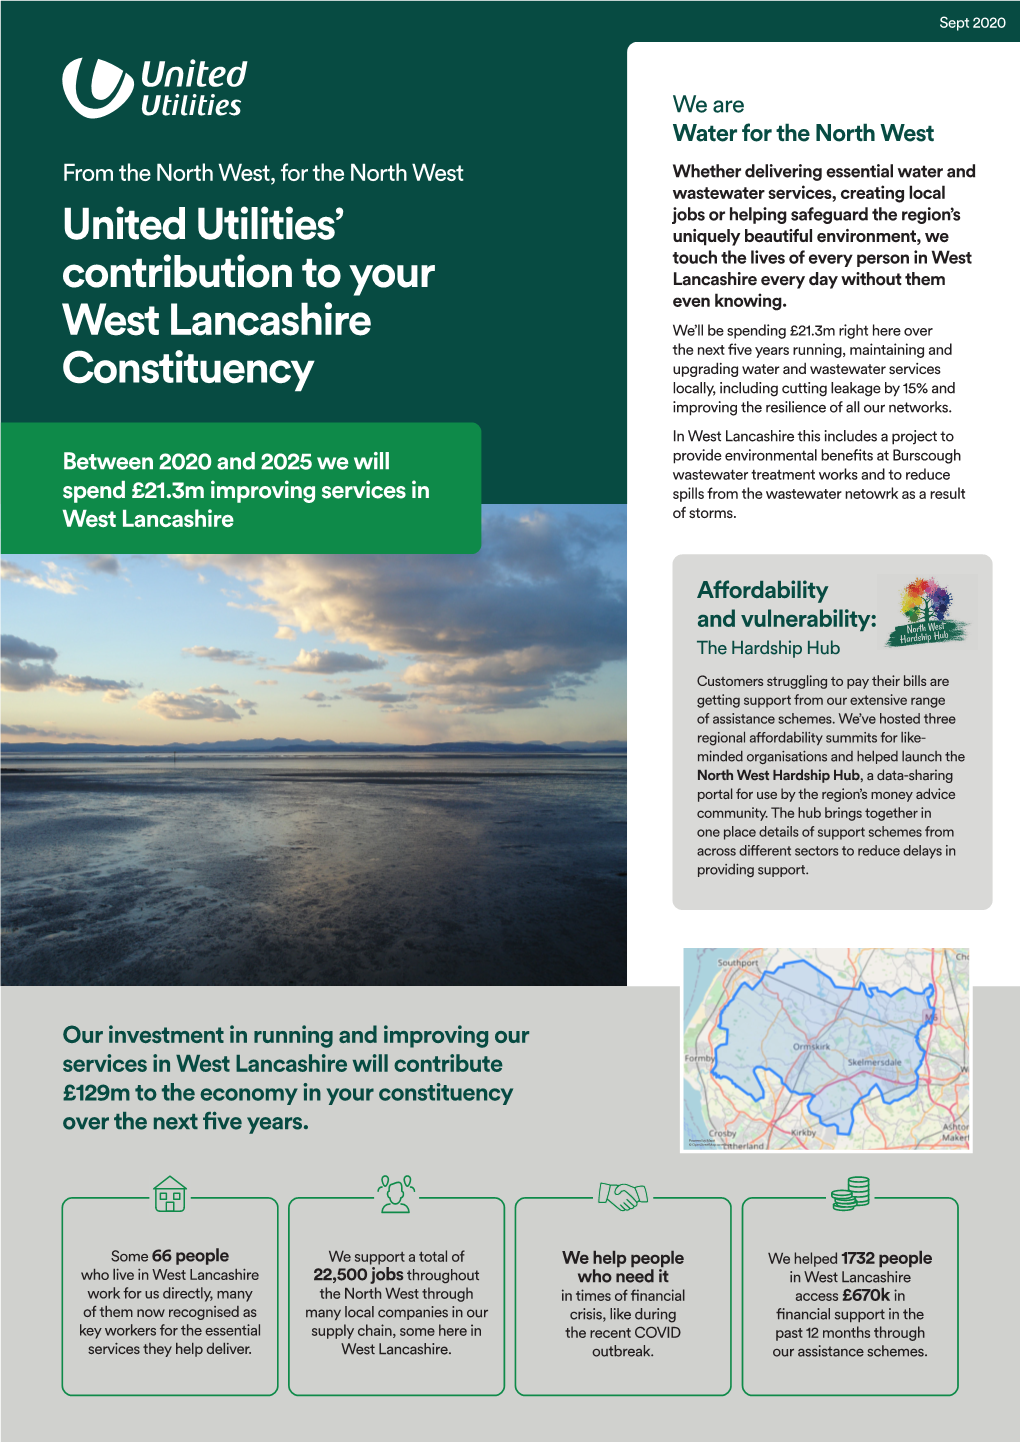 United Utilities' Contribution to Your West Lancashire Constituency